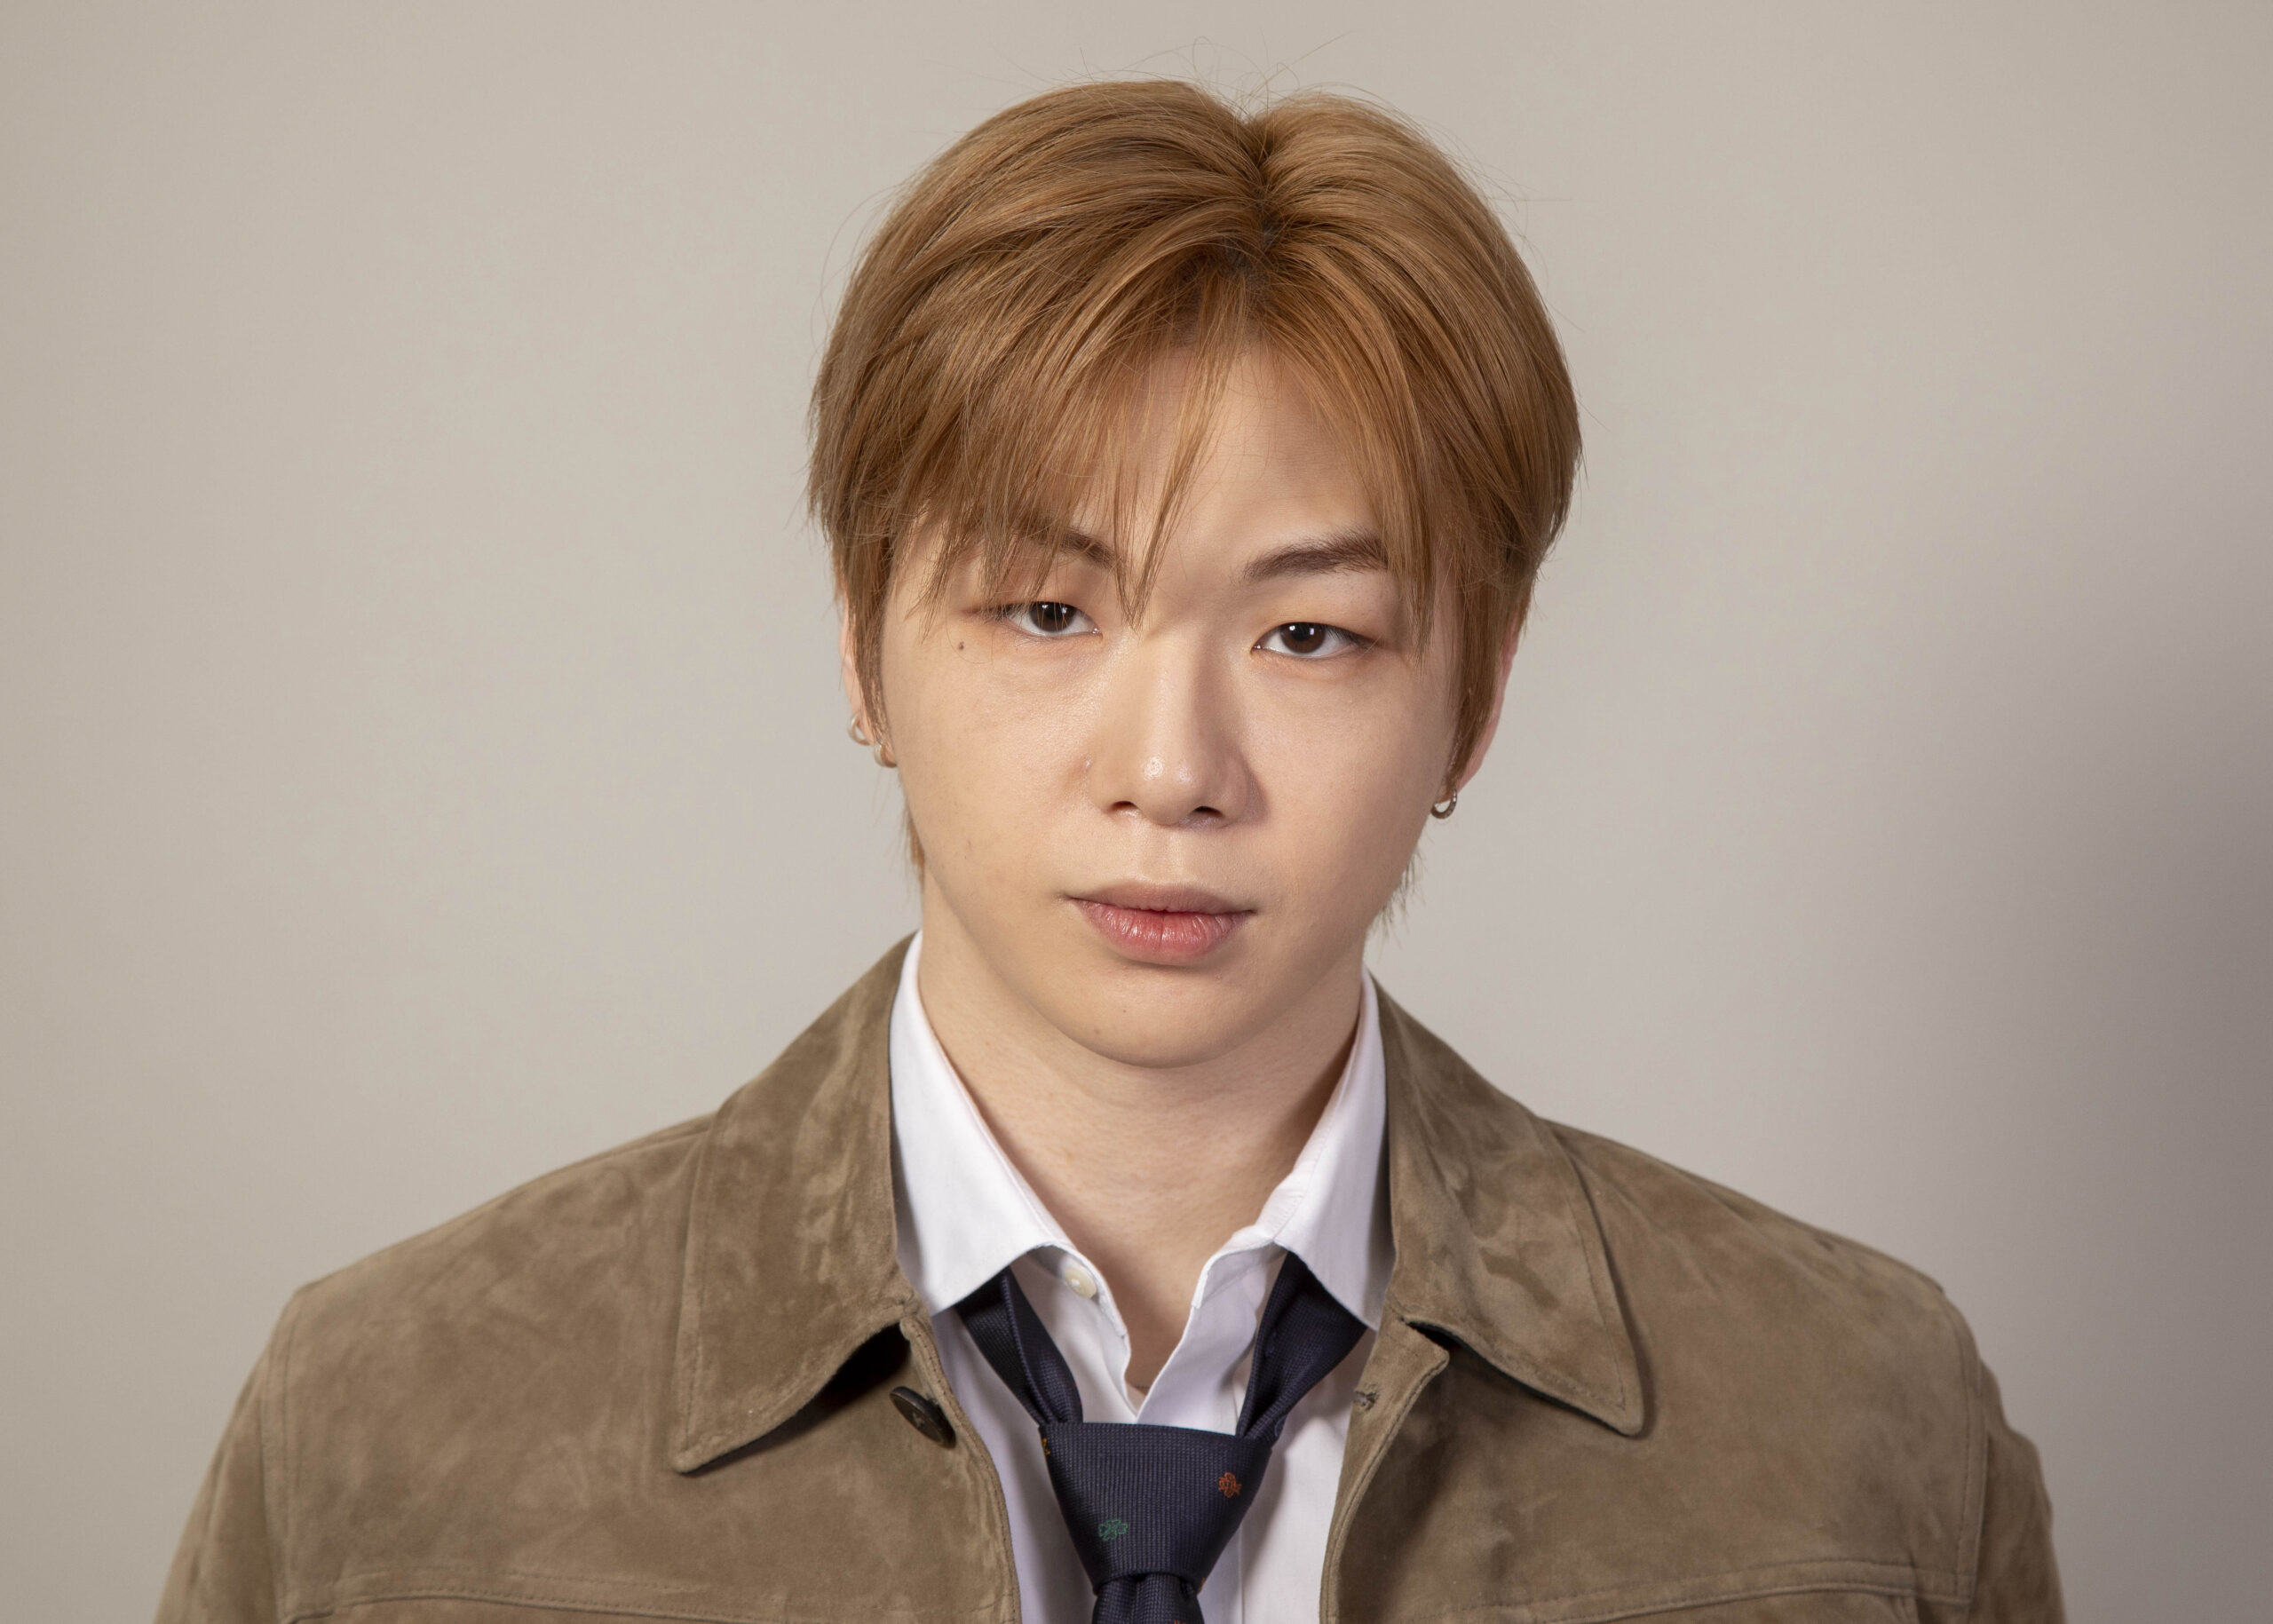 KANGDANIEL poses for a portrait on Thursday, March 2, 2023, in New York. The K-pop star's path to s...